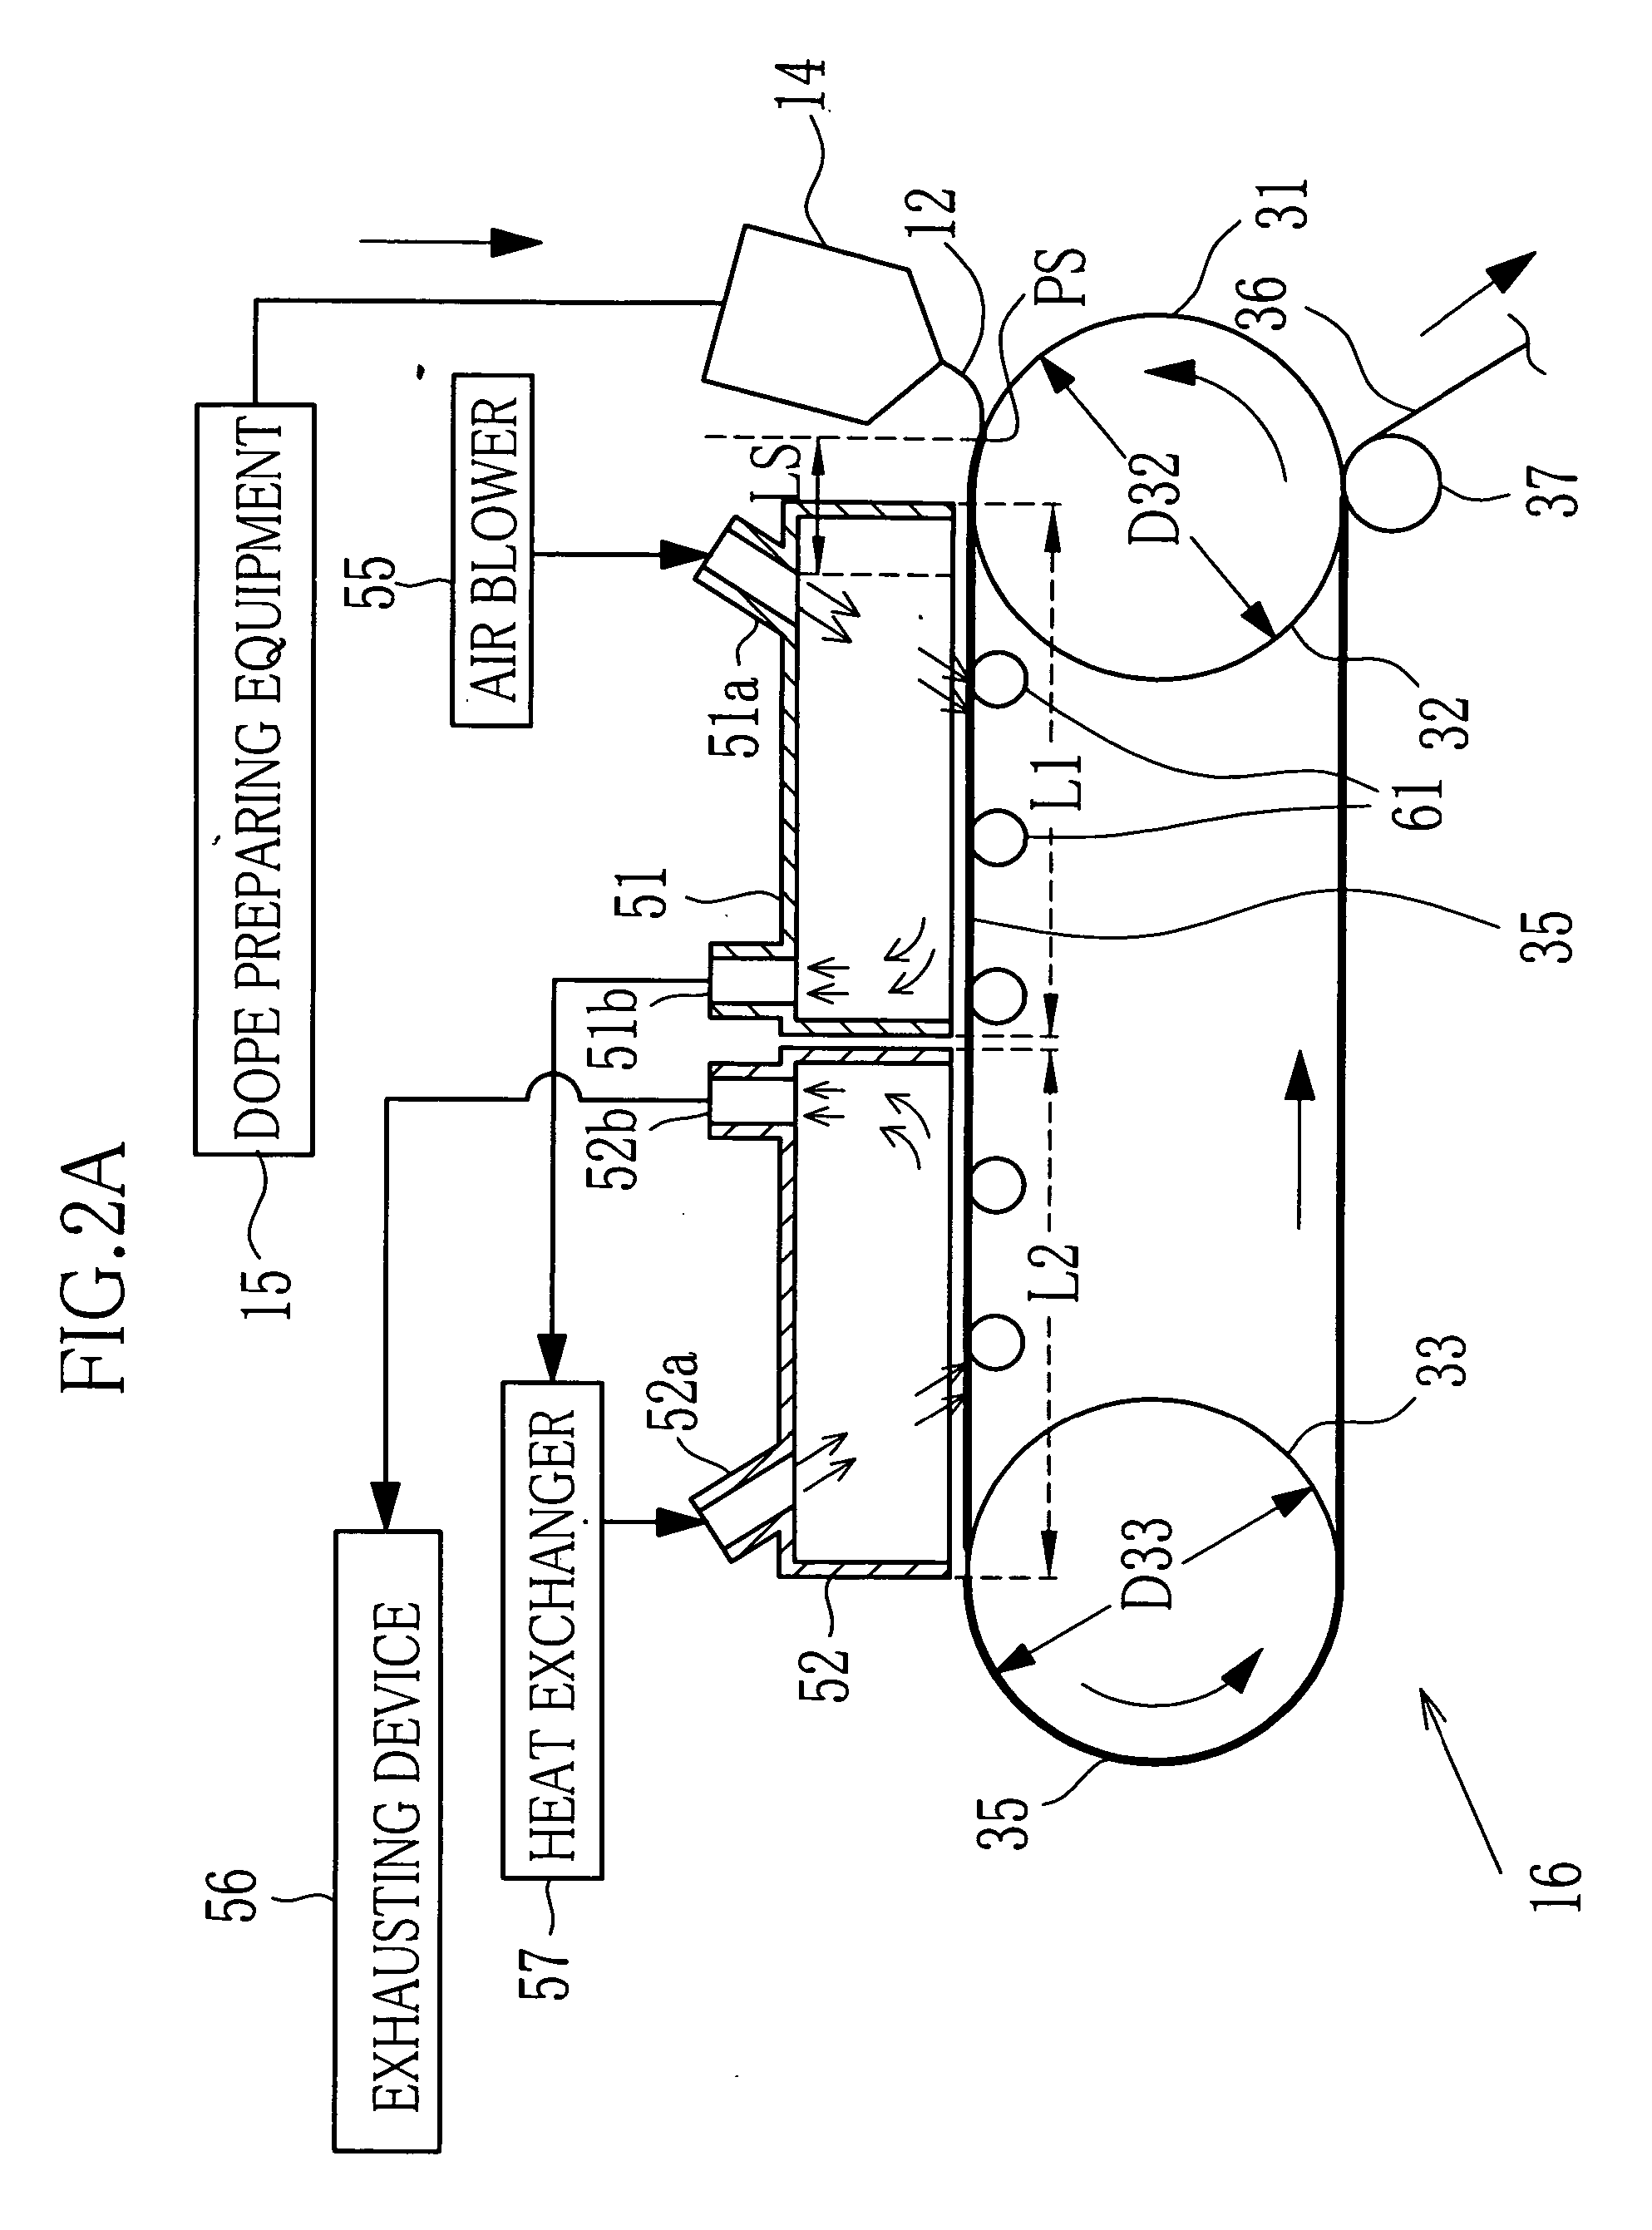 Method of producing film from polymer solution